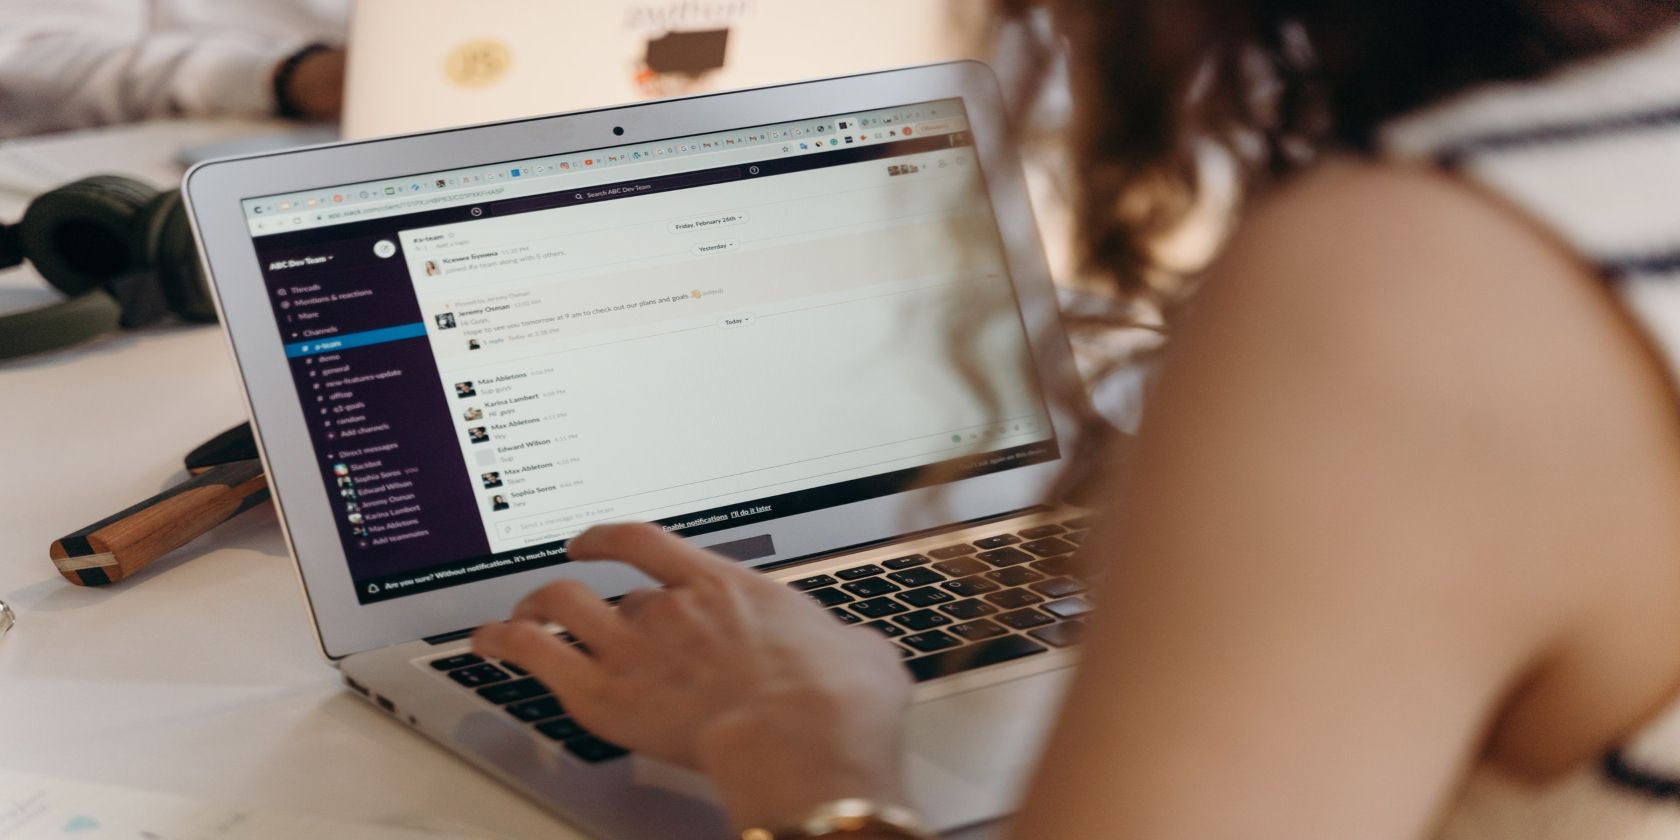 Image shows a women using Slack on a MacBook